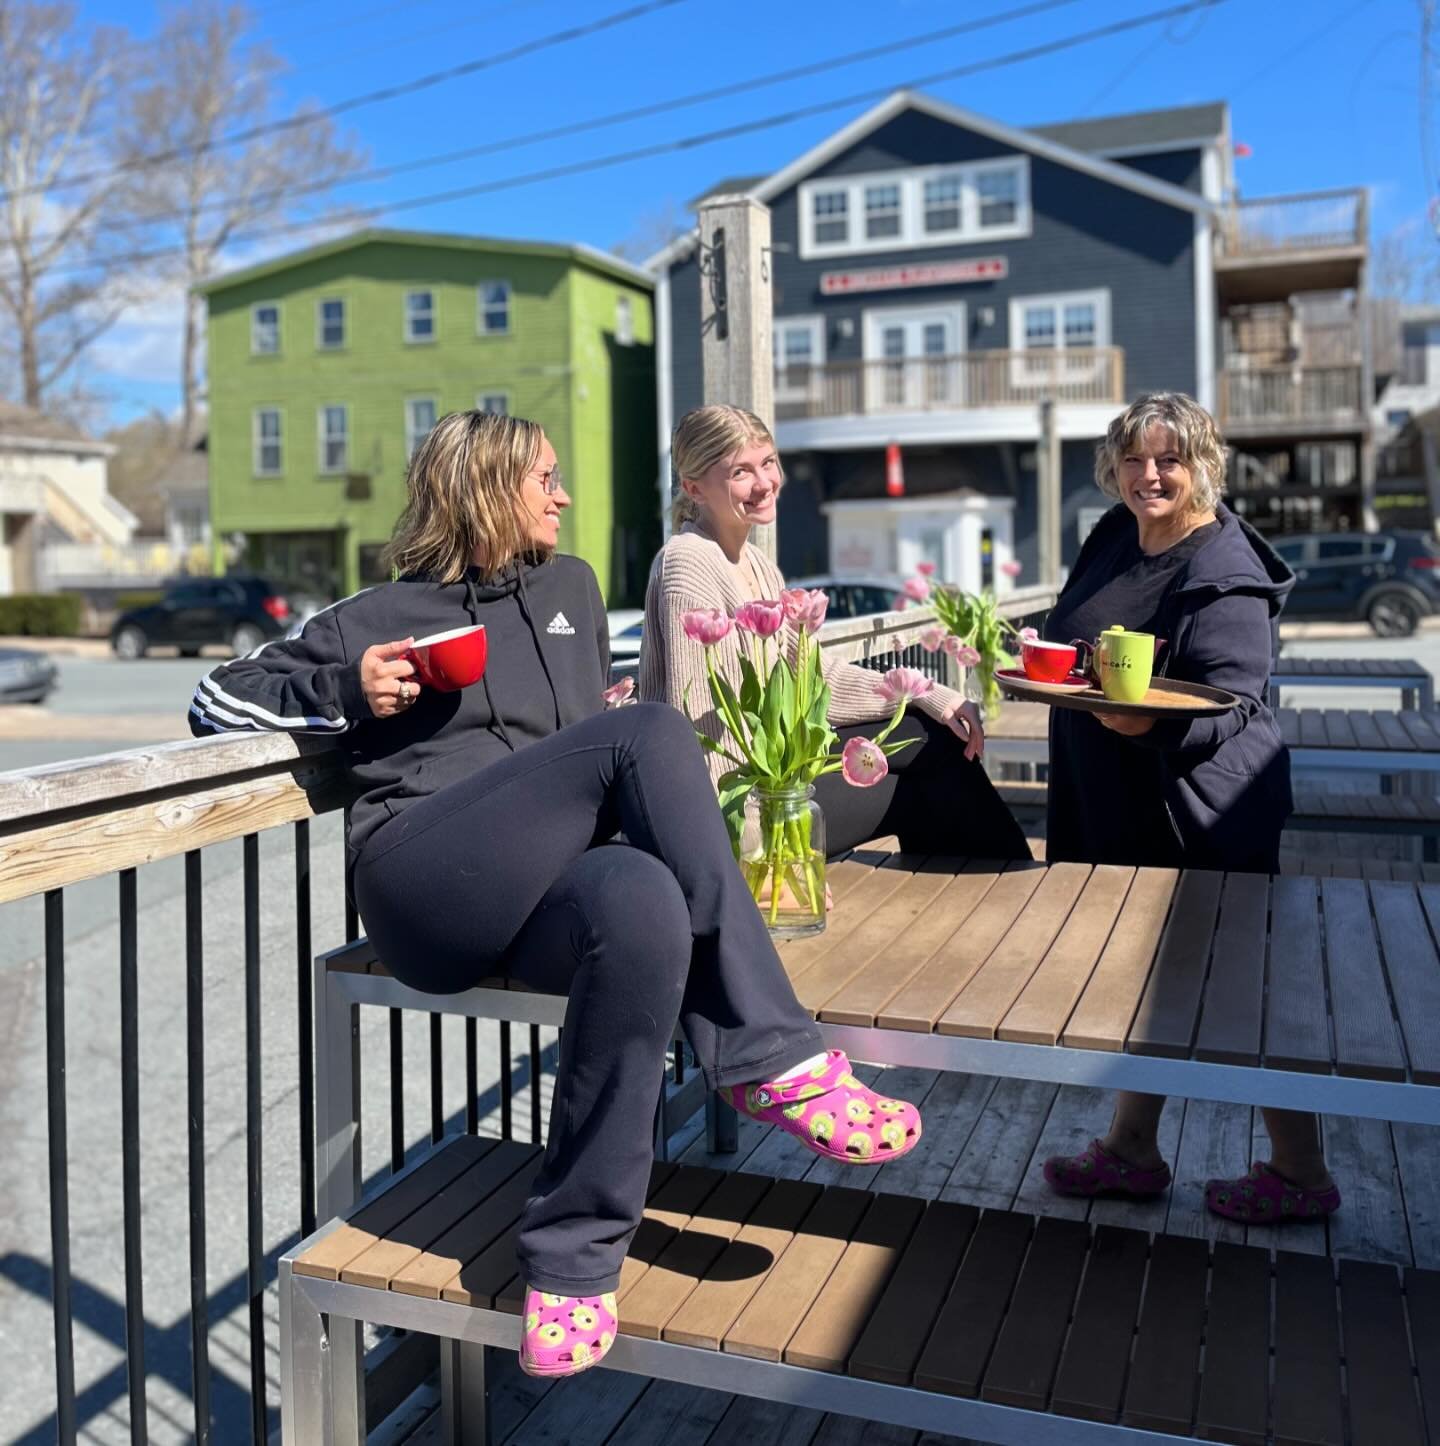 IT&rsquo;S OFFICIALLY PATIO SZN 🌸 #patioseason #dogfriendly #kiwicafe #chester #buylocal